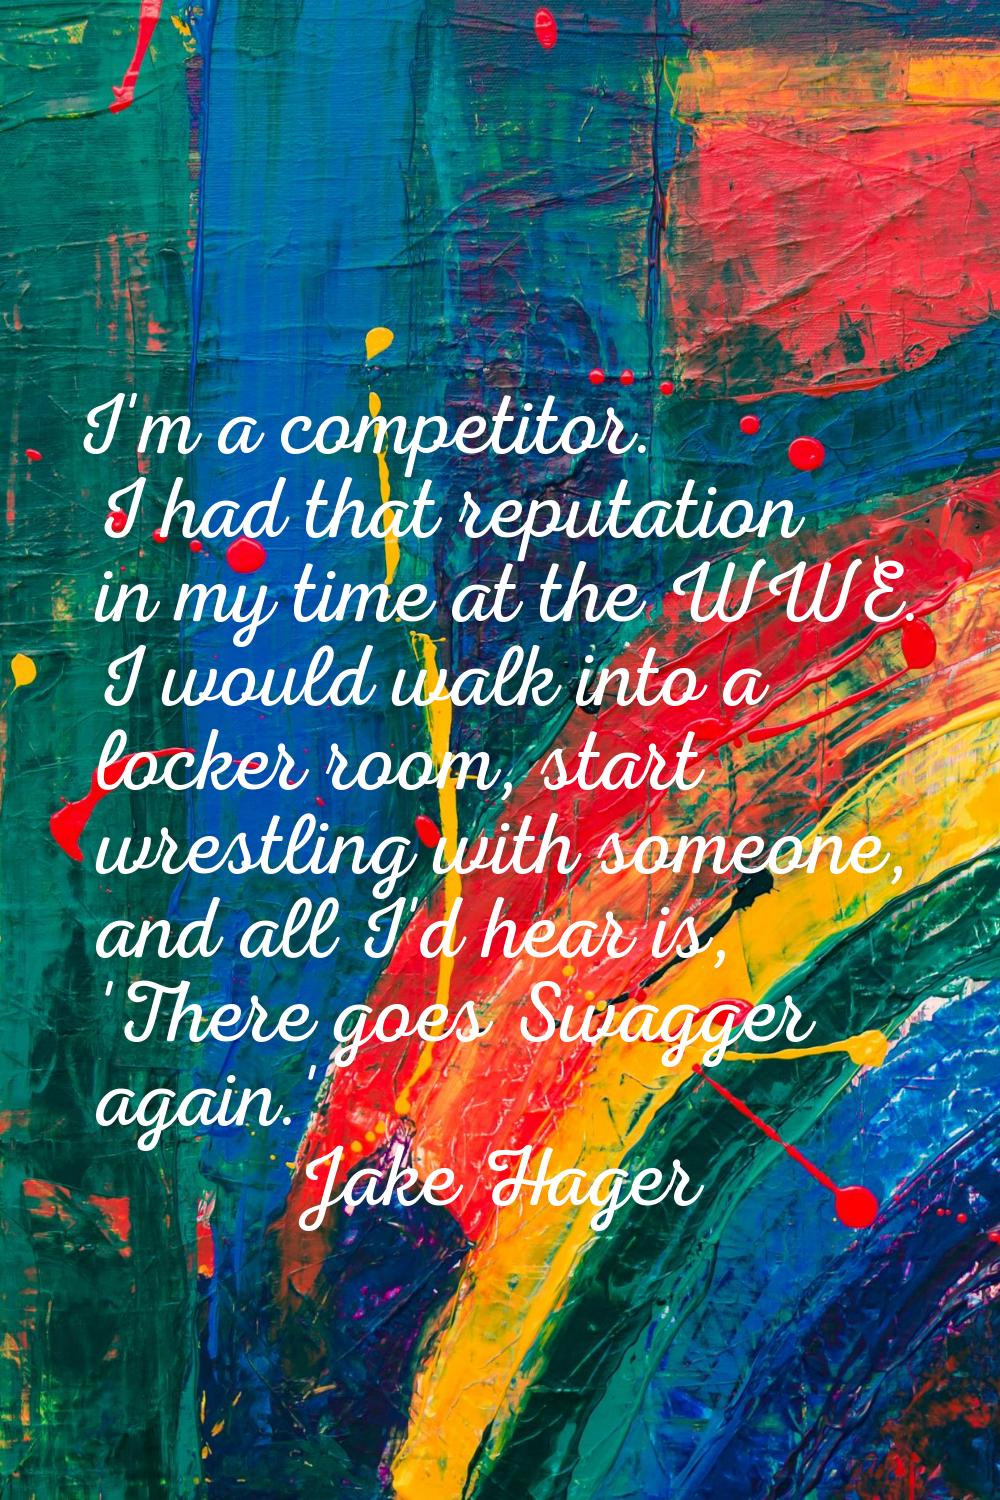 I'm a competitor. I had that reputation in my time at the WWE. I would walk into a locker room, sta